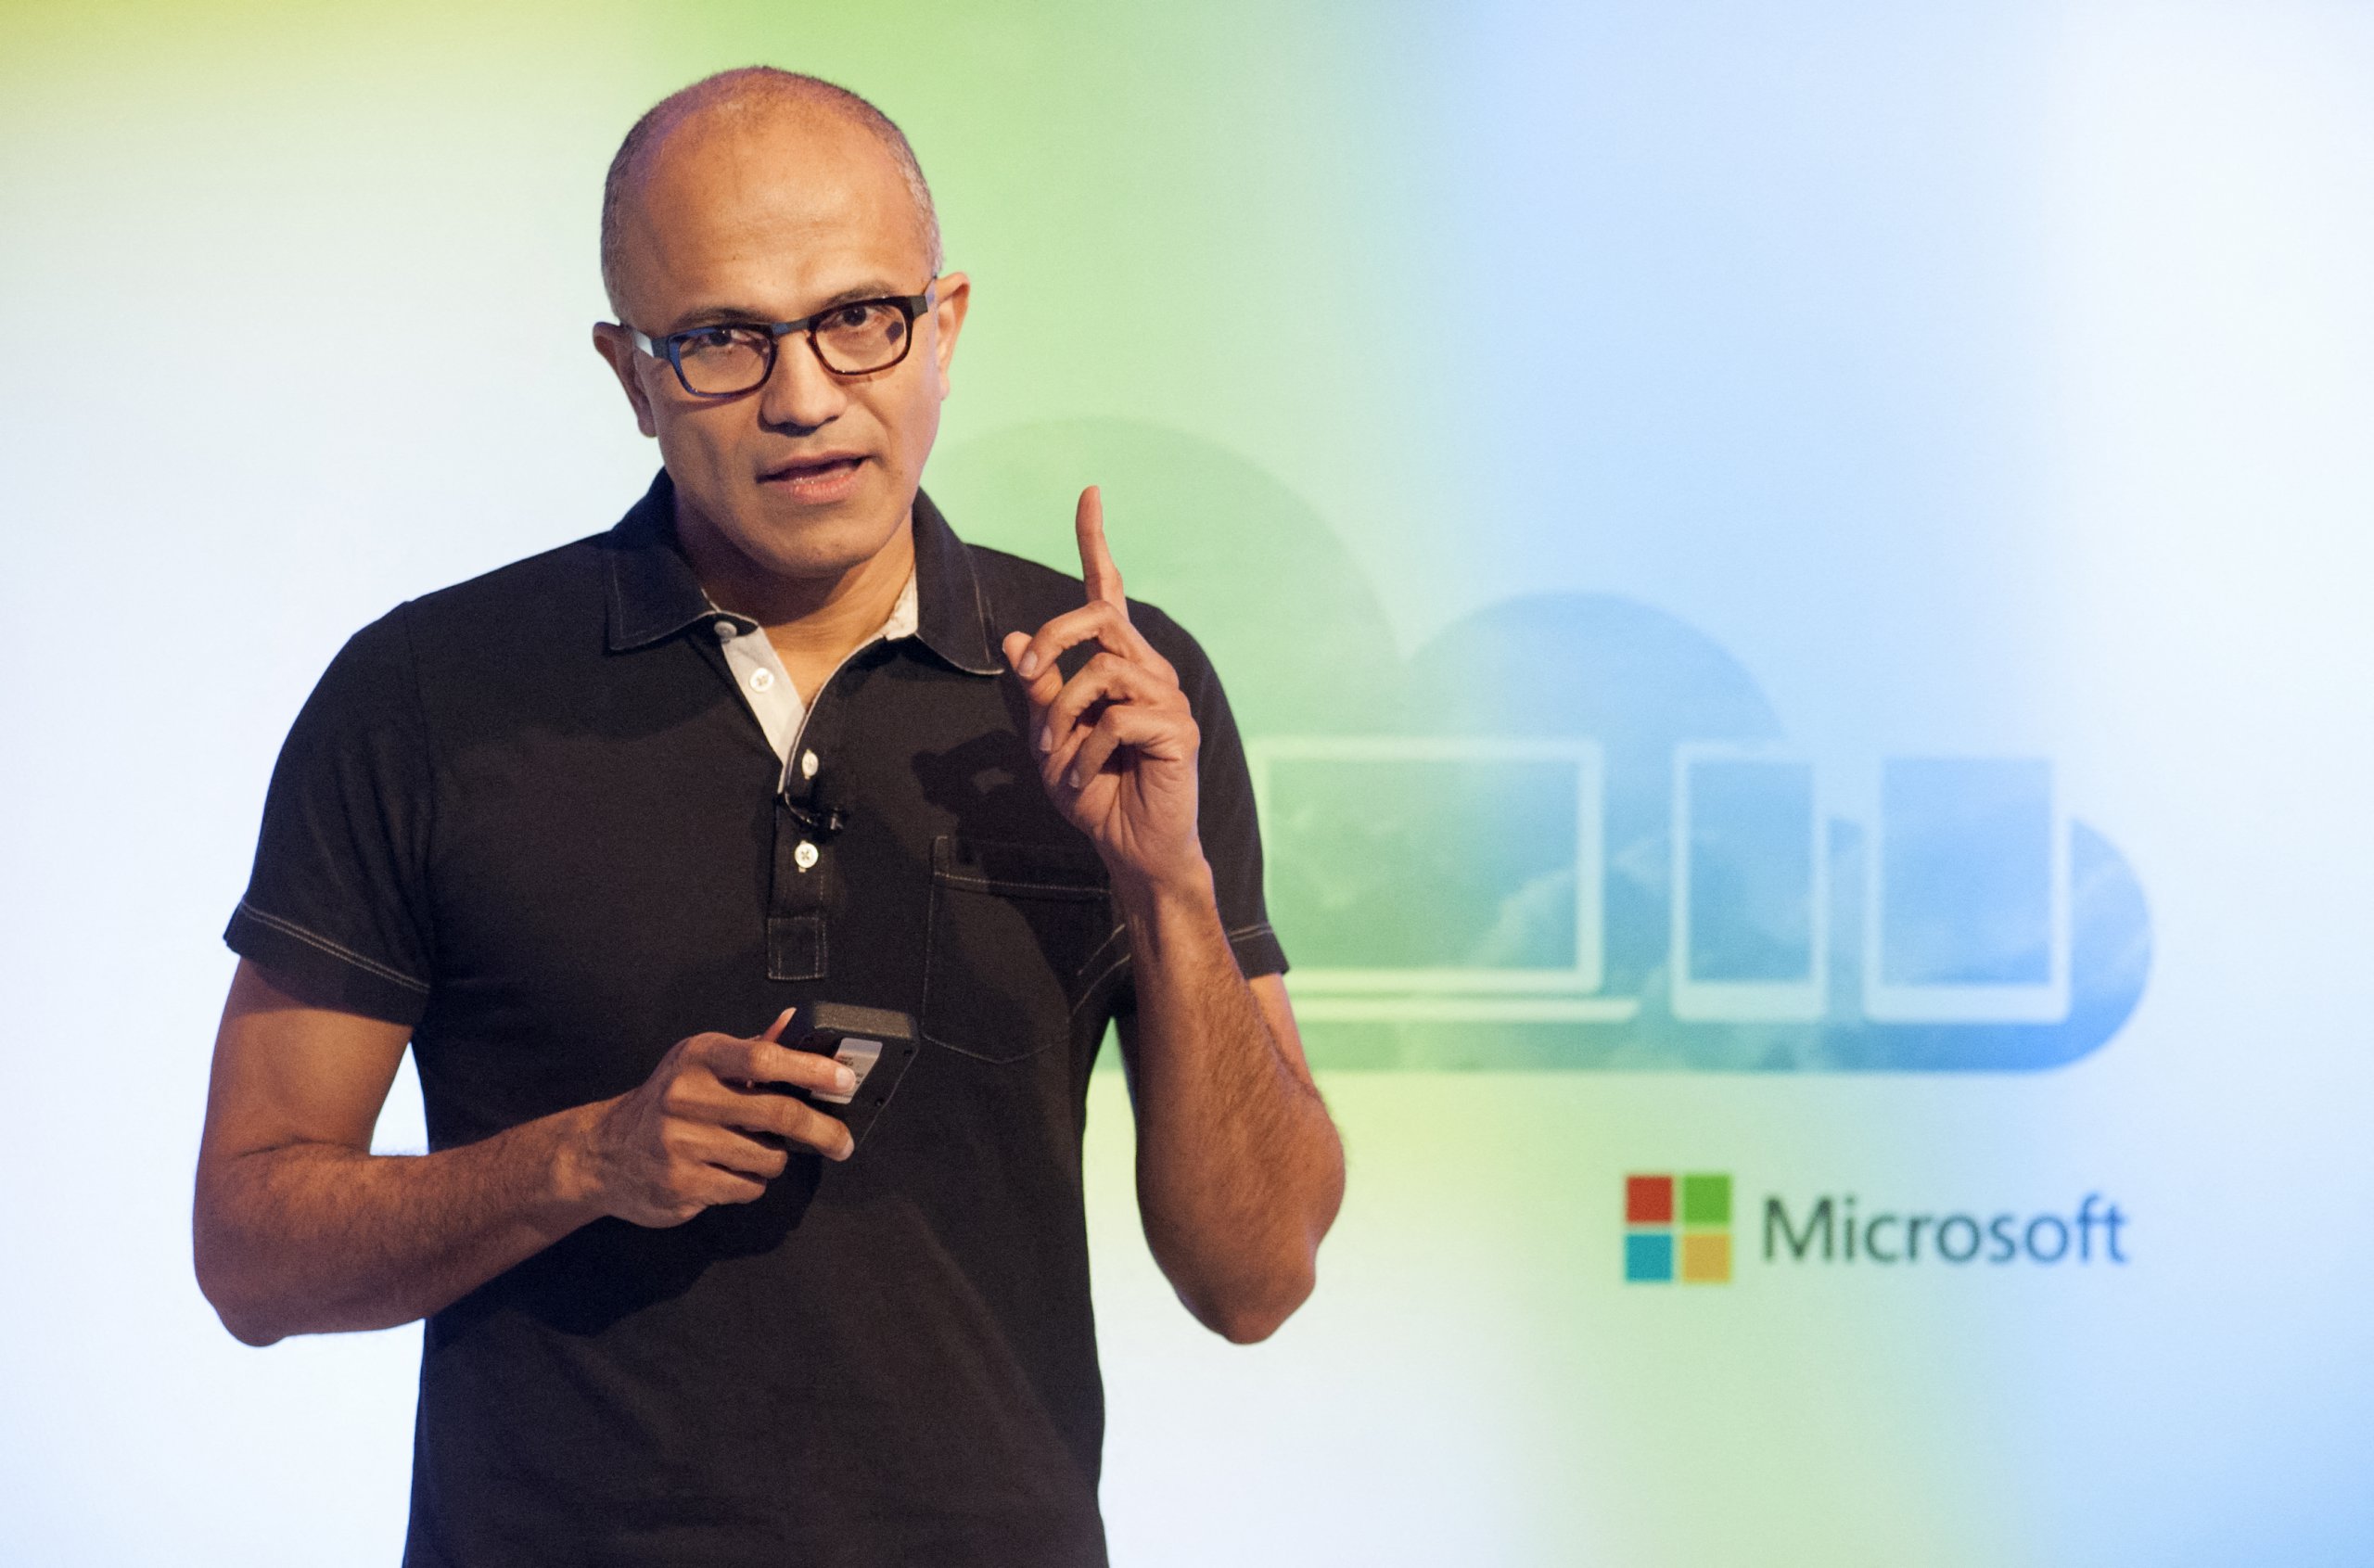 Microsoft this week reported strong quarterly earnings, powered by demand for cloud computing